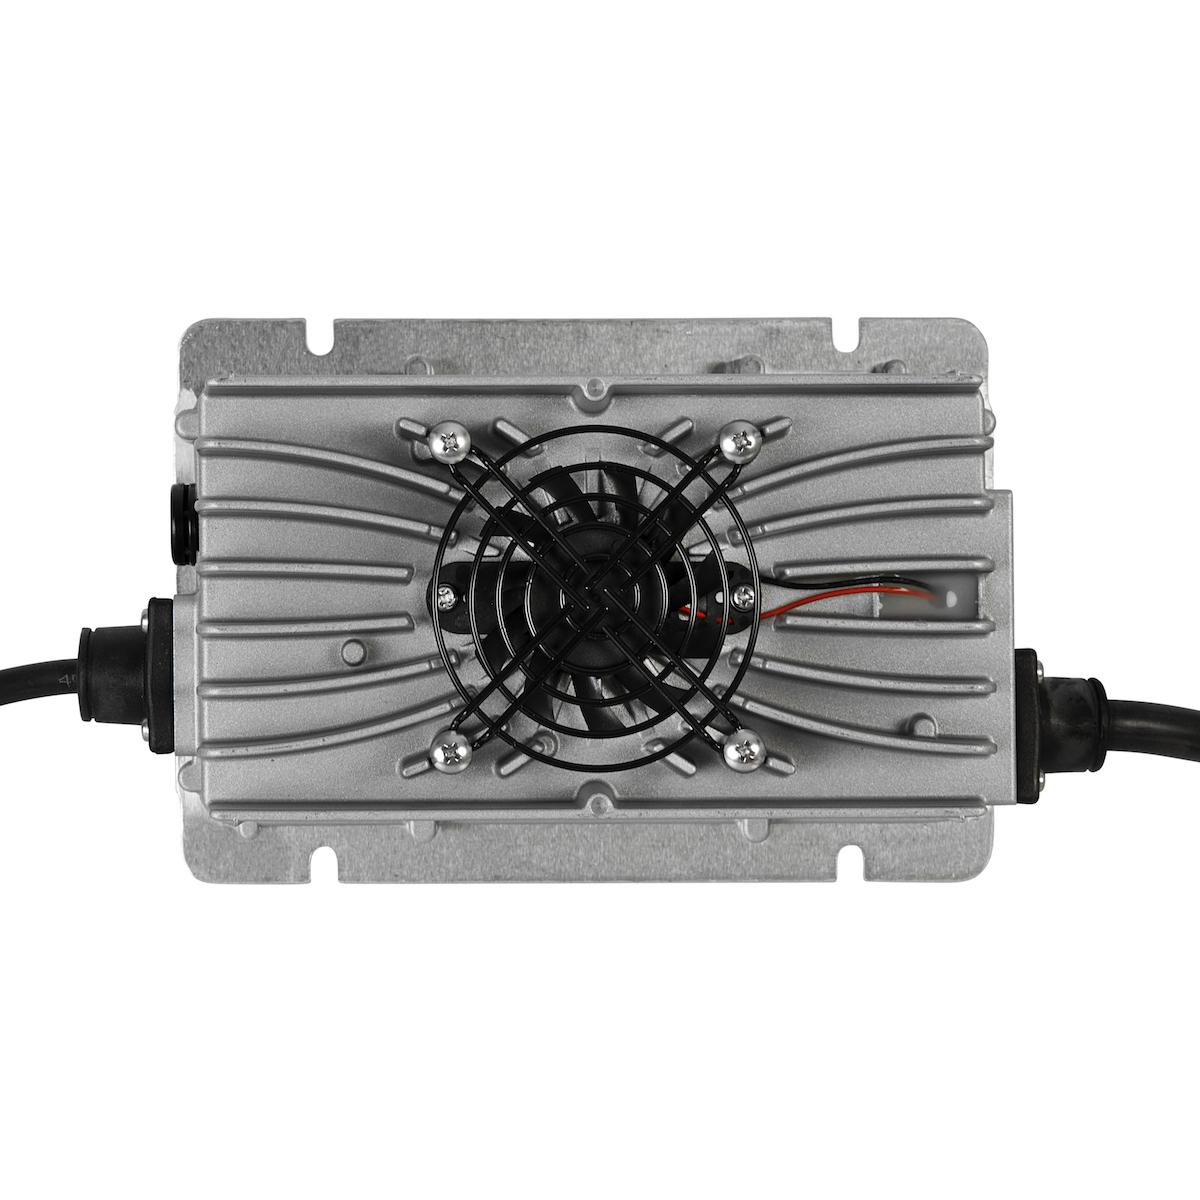 12.6V20A charger waterproof